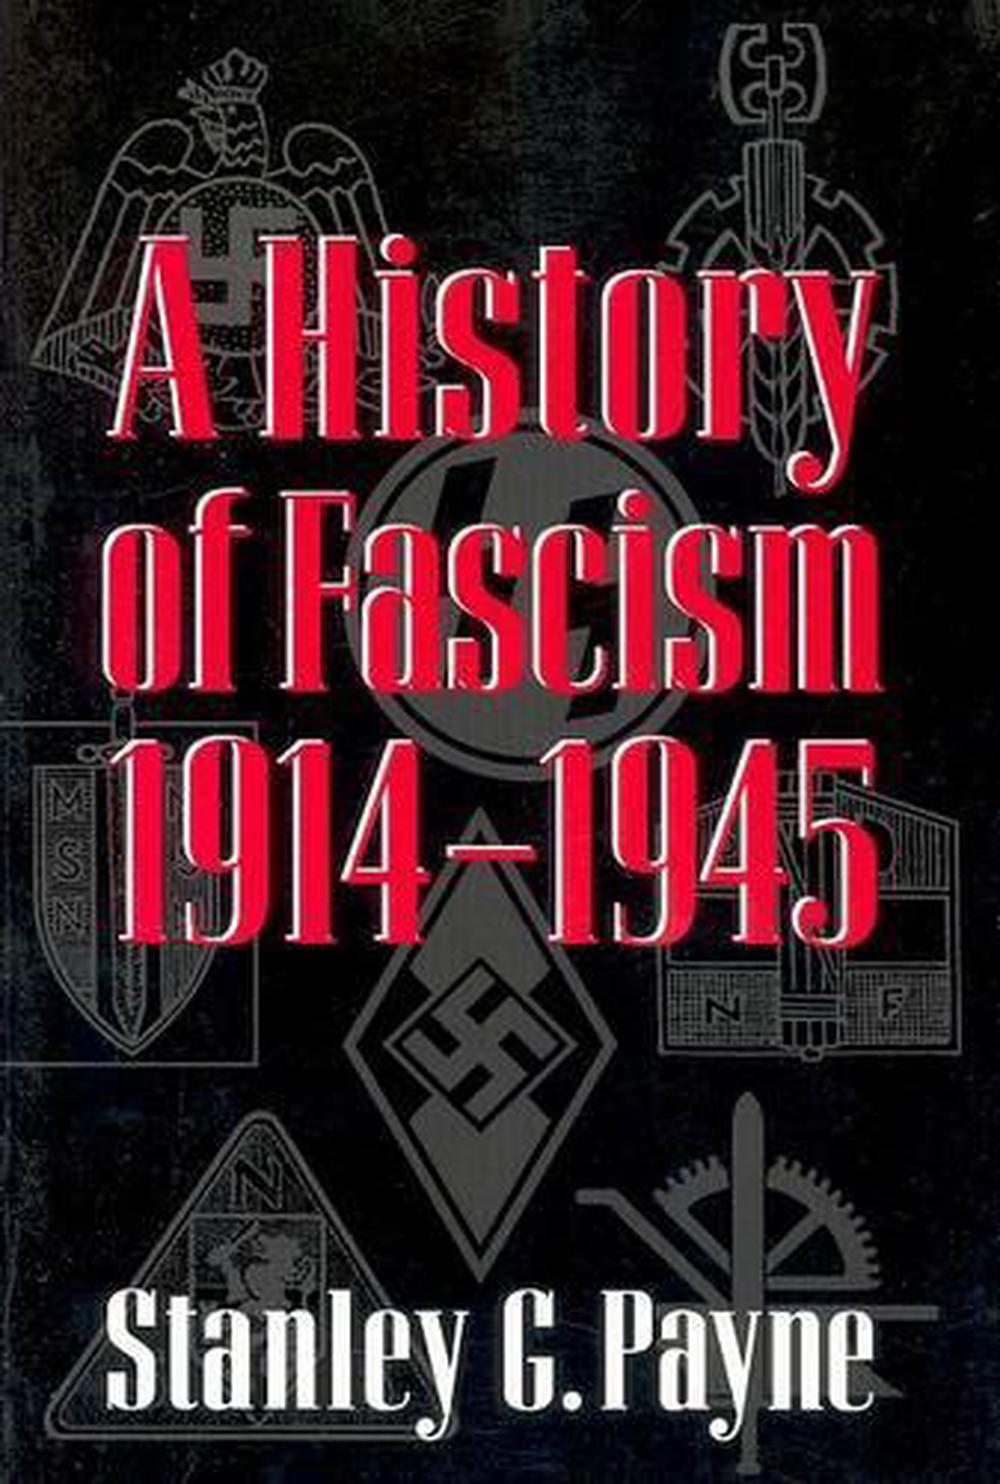 A History of Fascism, 19141945 by Stanley G. Payne (English) Paperback Book Fre 9780299148744